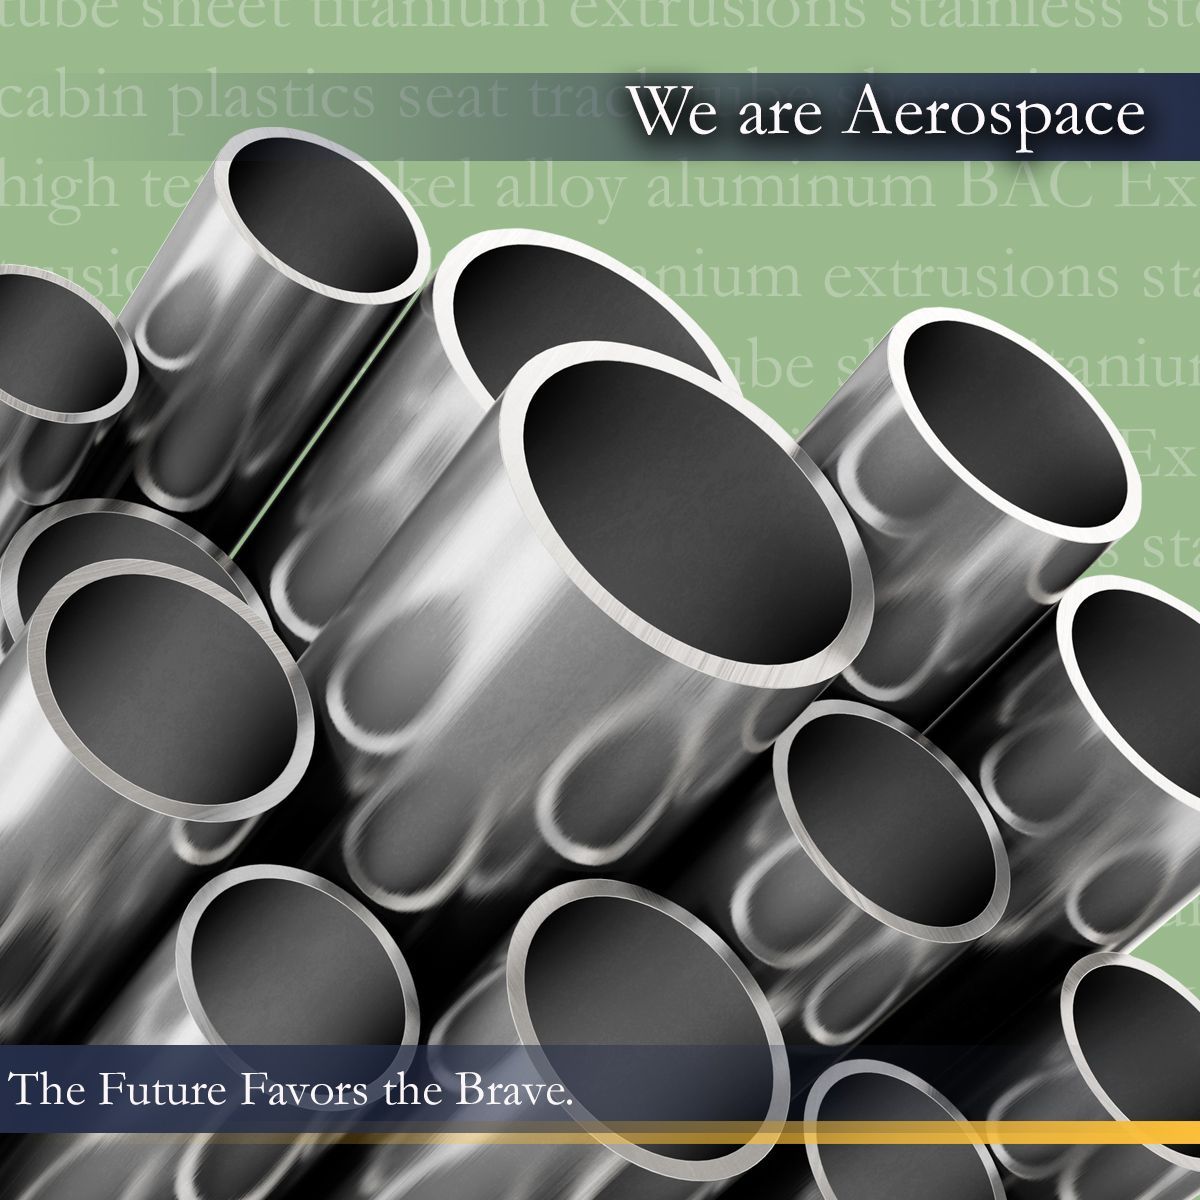 Extrusions, aircraft, aerospace, metal supplier, metals 1. "Future Metals supplies aircraft-grade Titanium alloy cylindrical rollforms, ideal for aerospace utilization."
2. "High-spec Aluminium rollform offerings from Future Metals, ideal for aerospace industry application."
3. "Nickel-based superalloy cylinders, suitable for aviation usage, provided by Future Metals."
4. "Aeroship-grade Steel rollforms from Future Metals' metals warehouse align with the supply chain compliance."
5. "Future Metals offers shiny Copper-alloy cylindrical rollforms, perfect for supplying the aerospace industry.